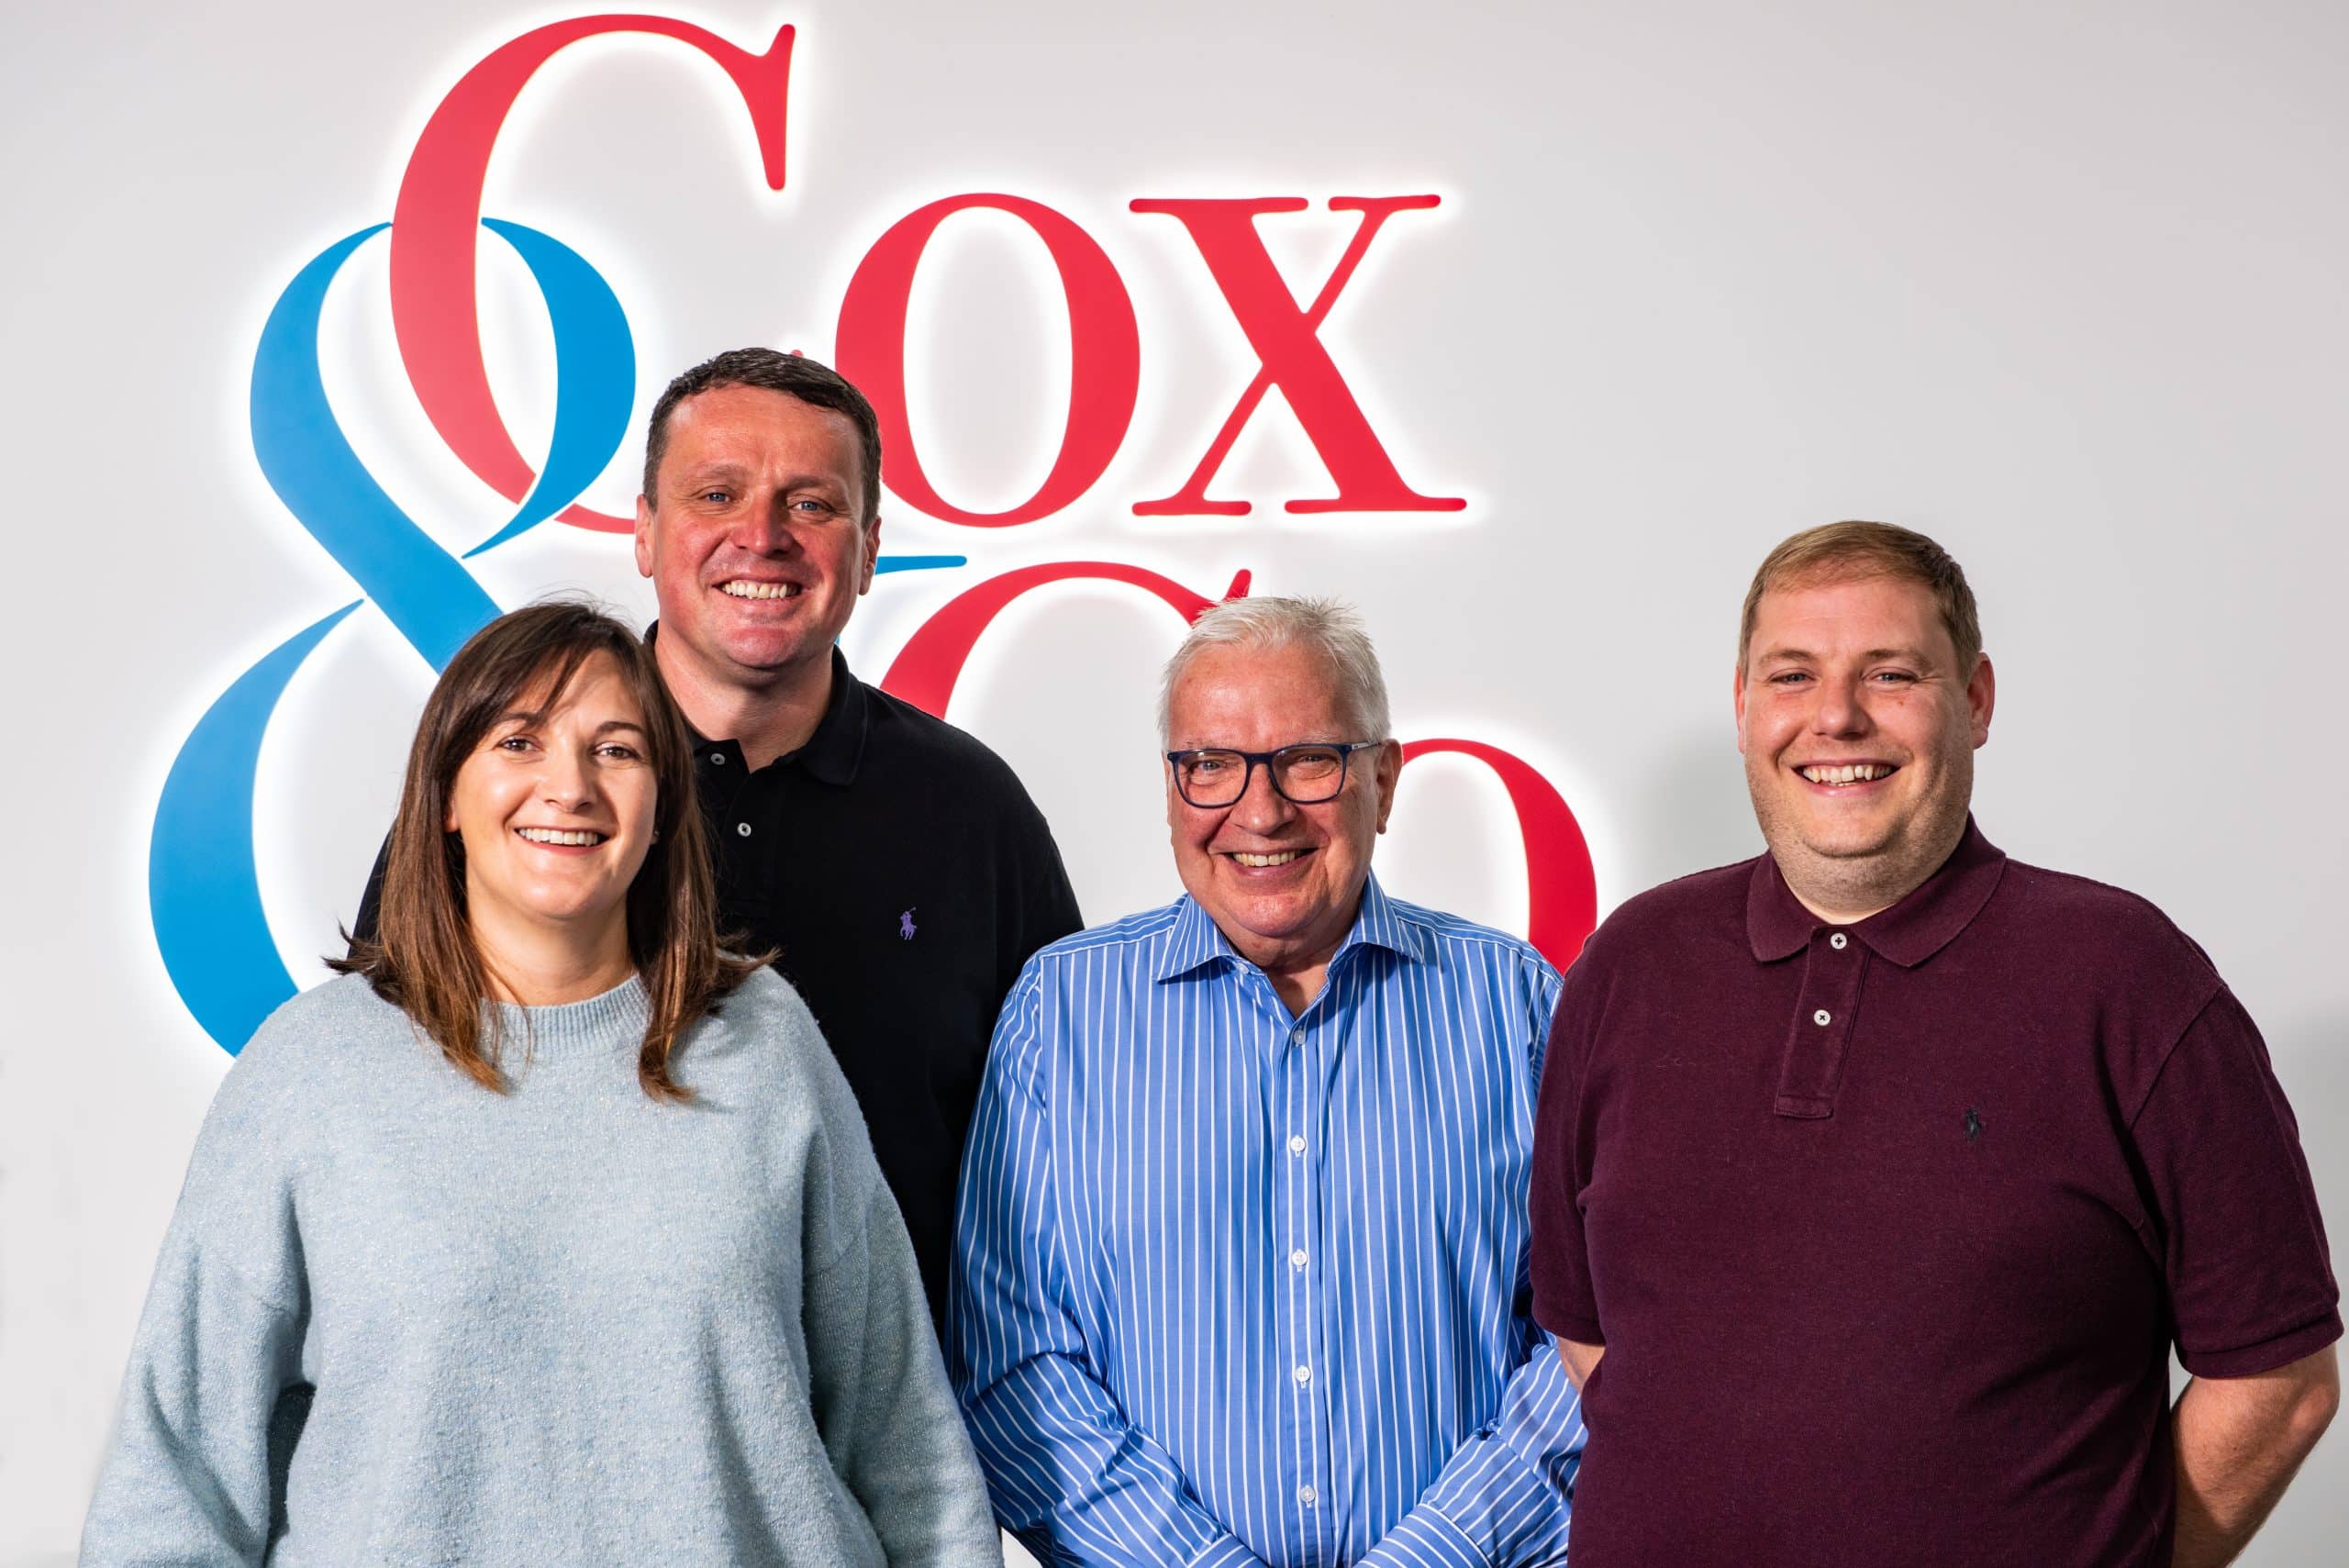 Cox & Co welcomes new team member